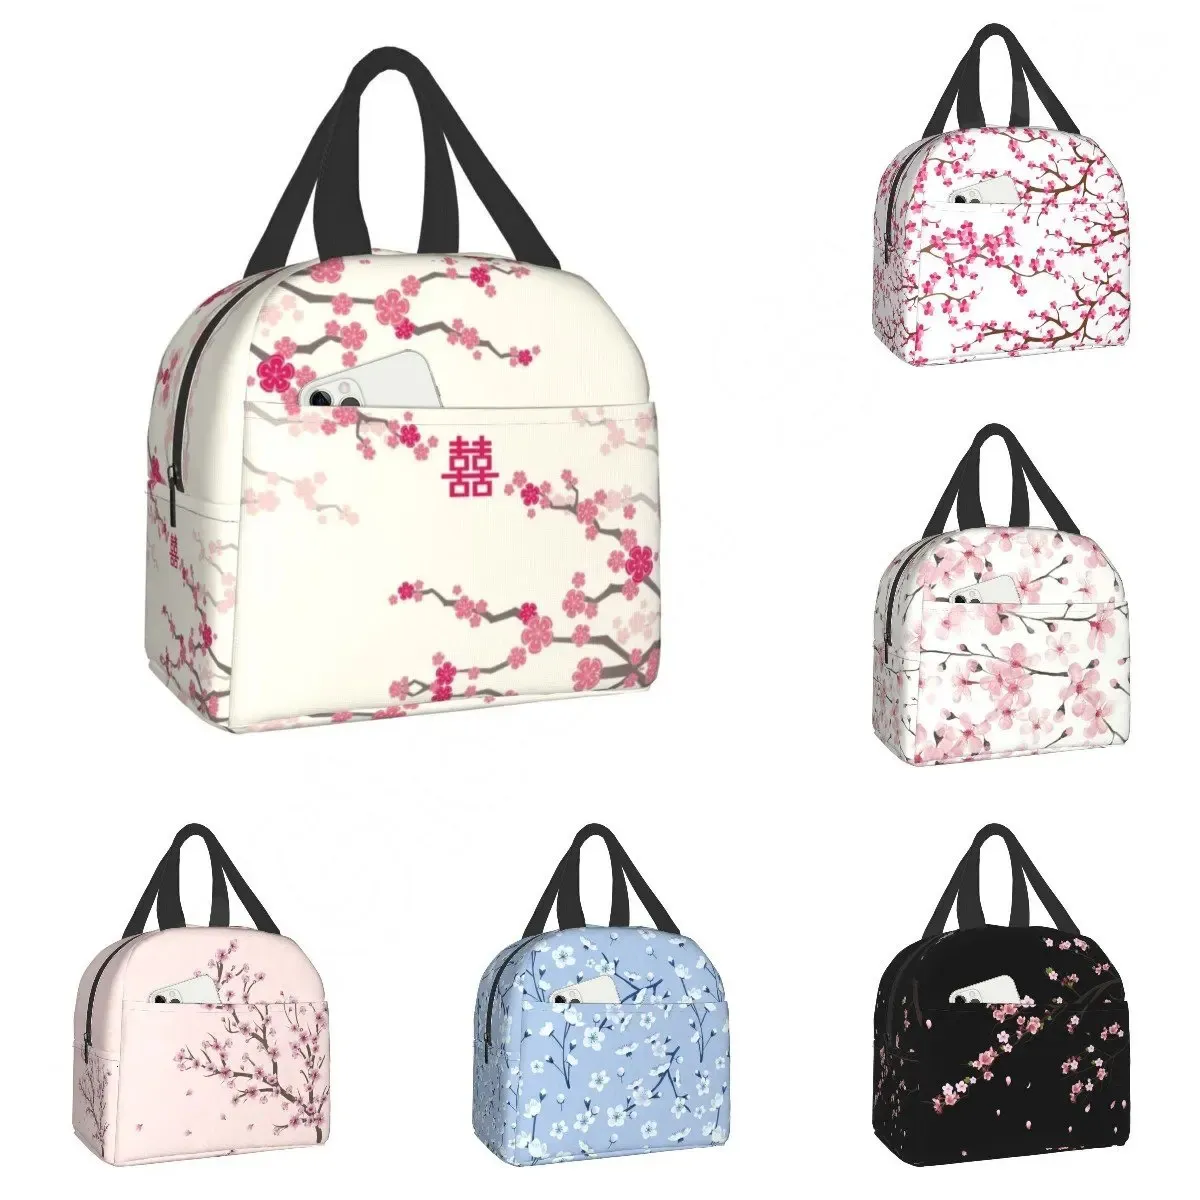 Japanese Sakura Cherry Blossoms Insulated Lunch Bags for Women Resuable Thermal Cooler Flowers Bento Box Kids School Children 240320